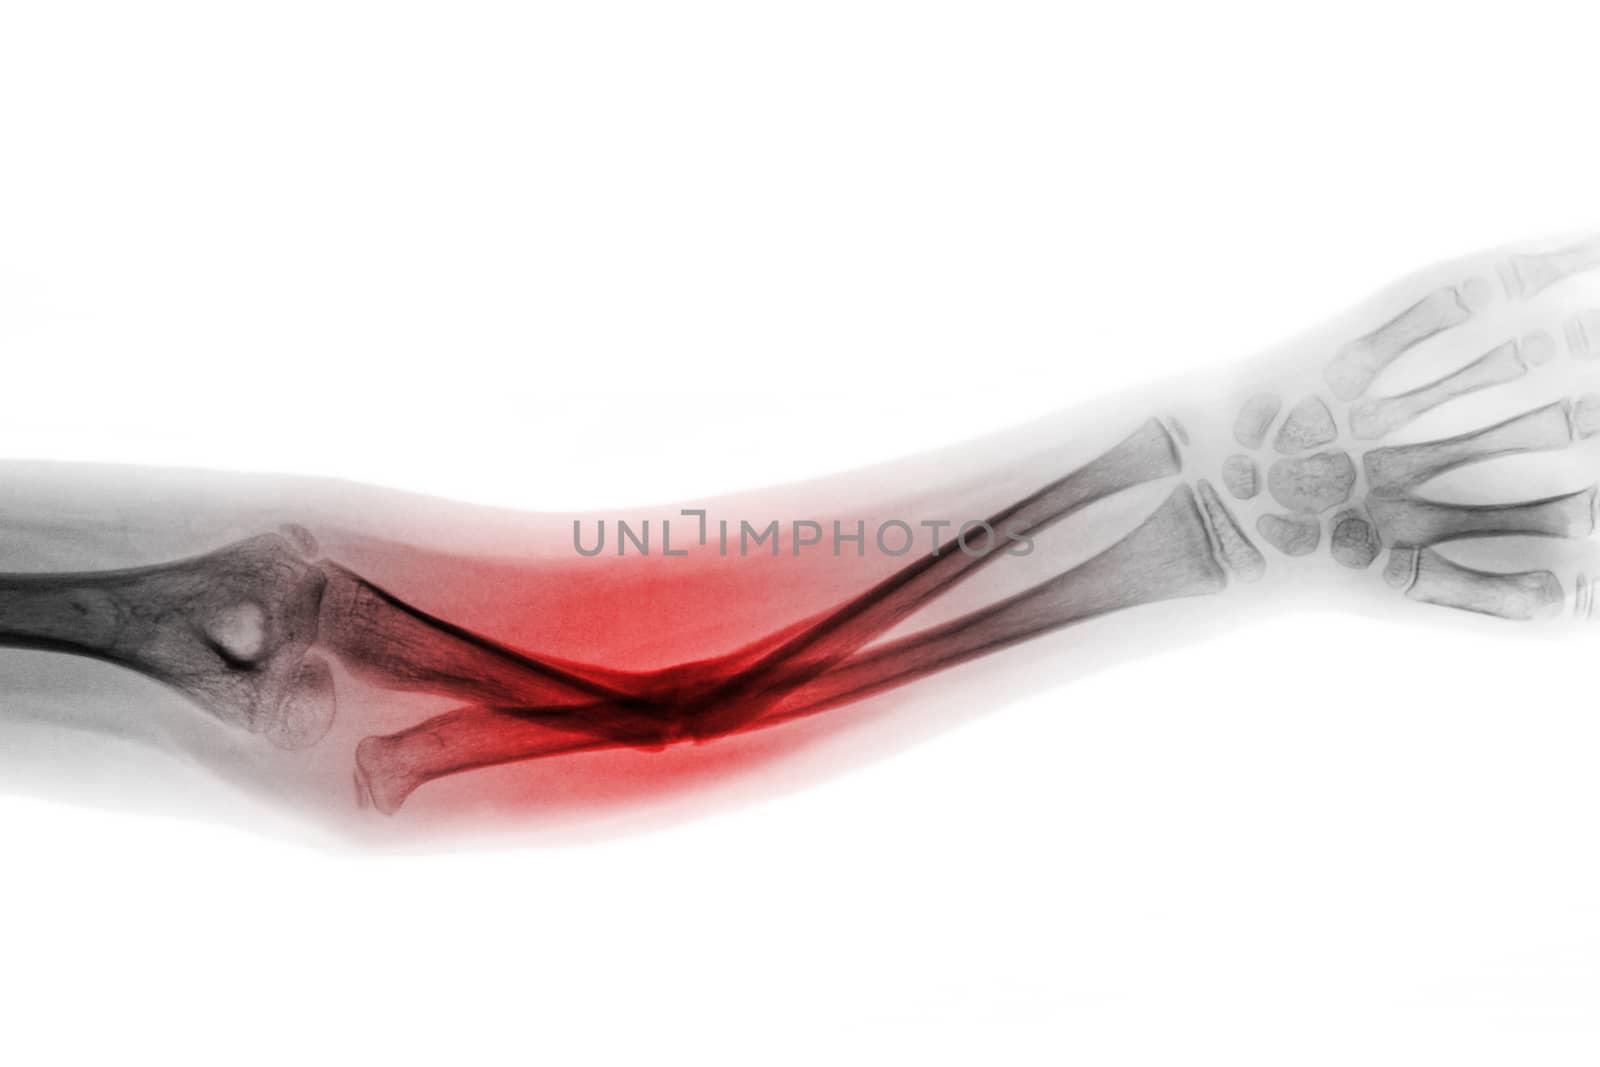 Film x-ray forearm AP show fracture shaft of ulnar bone .